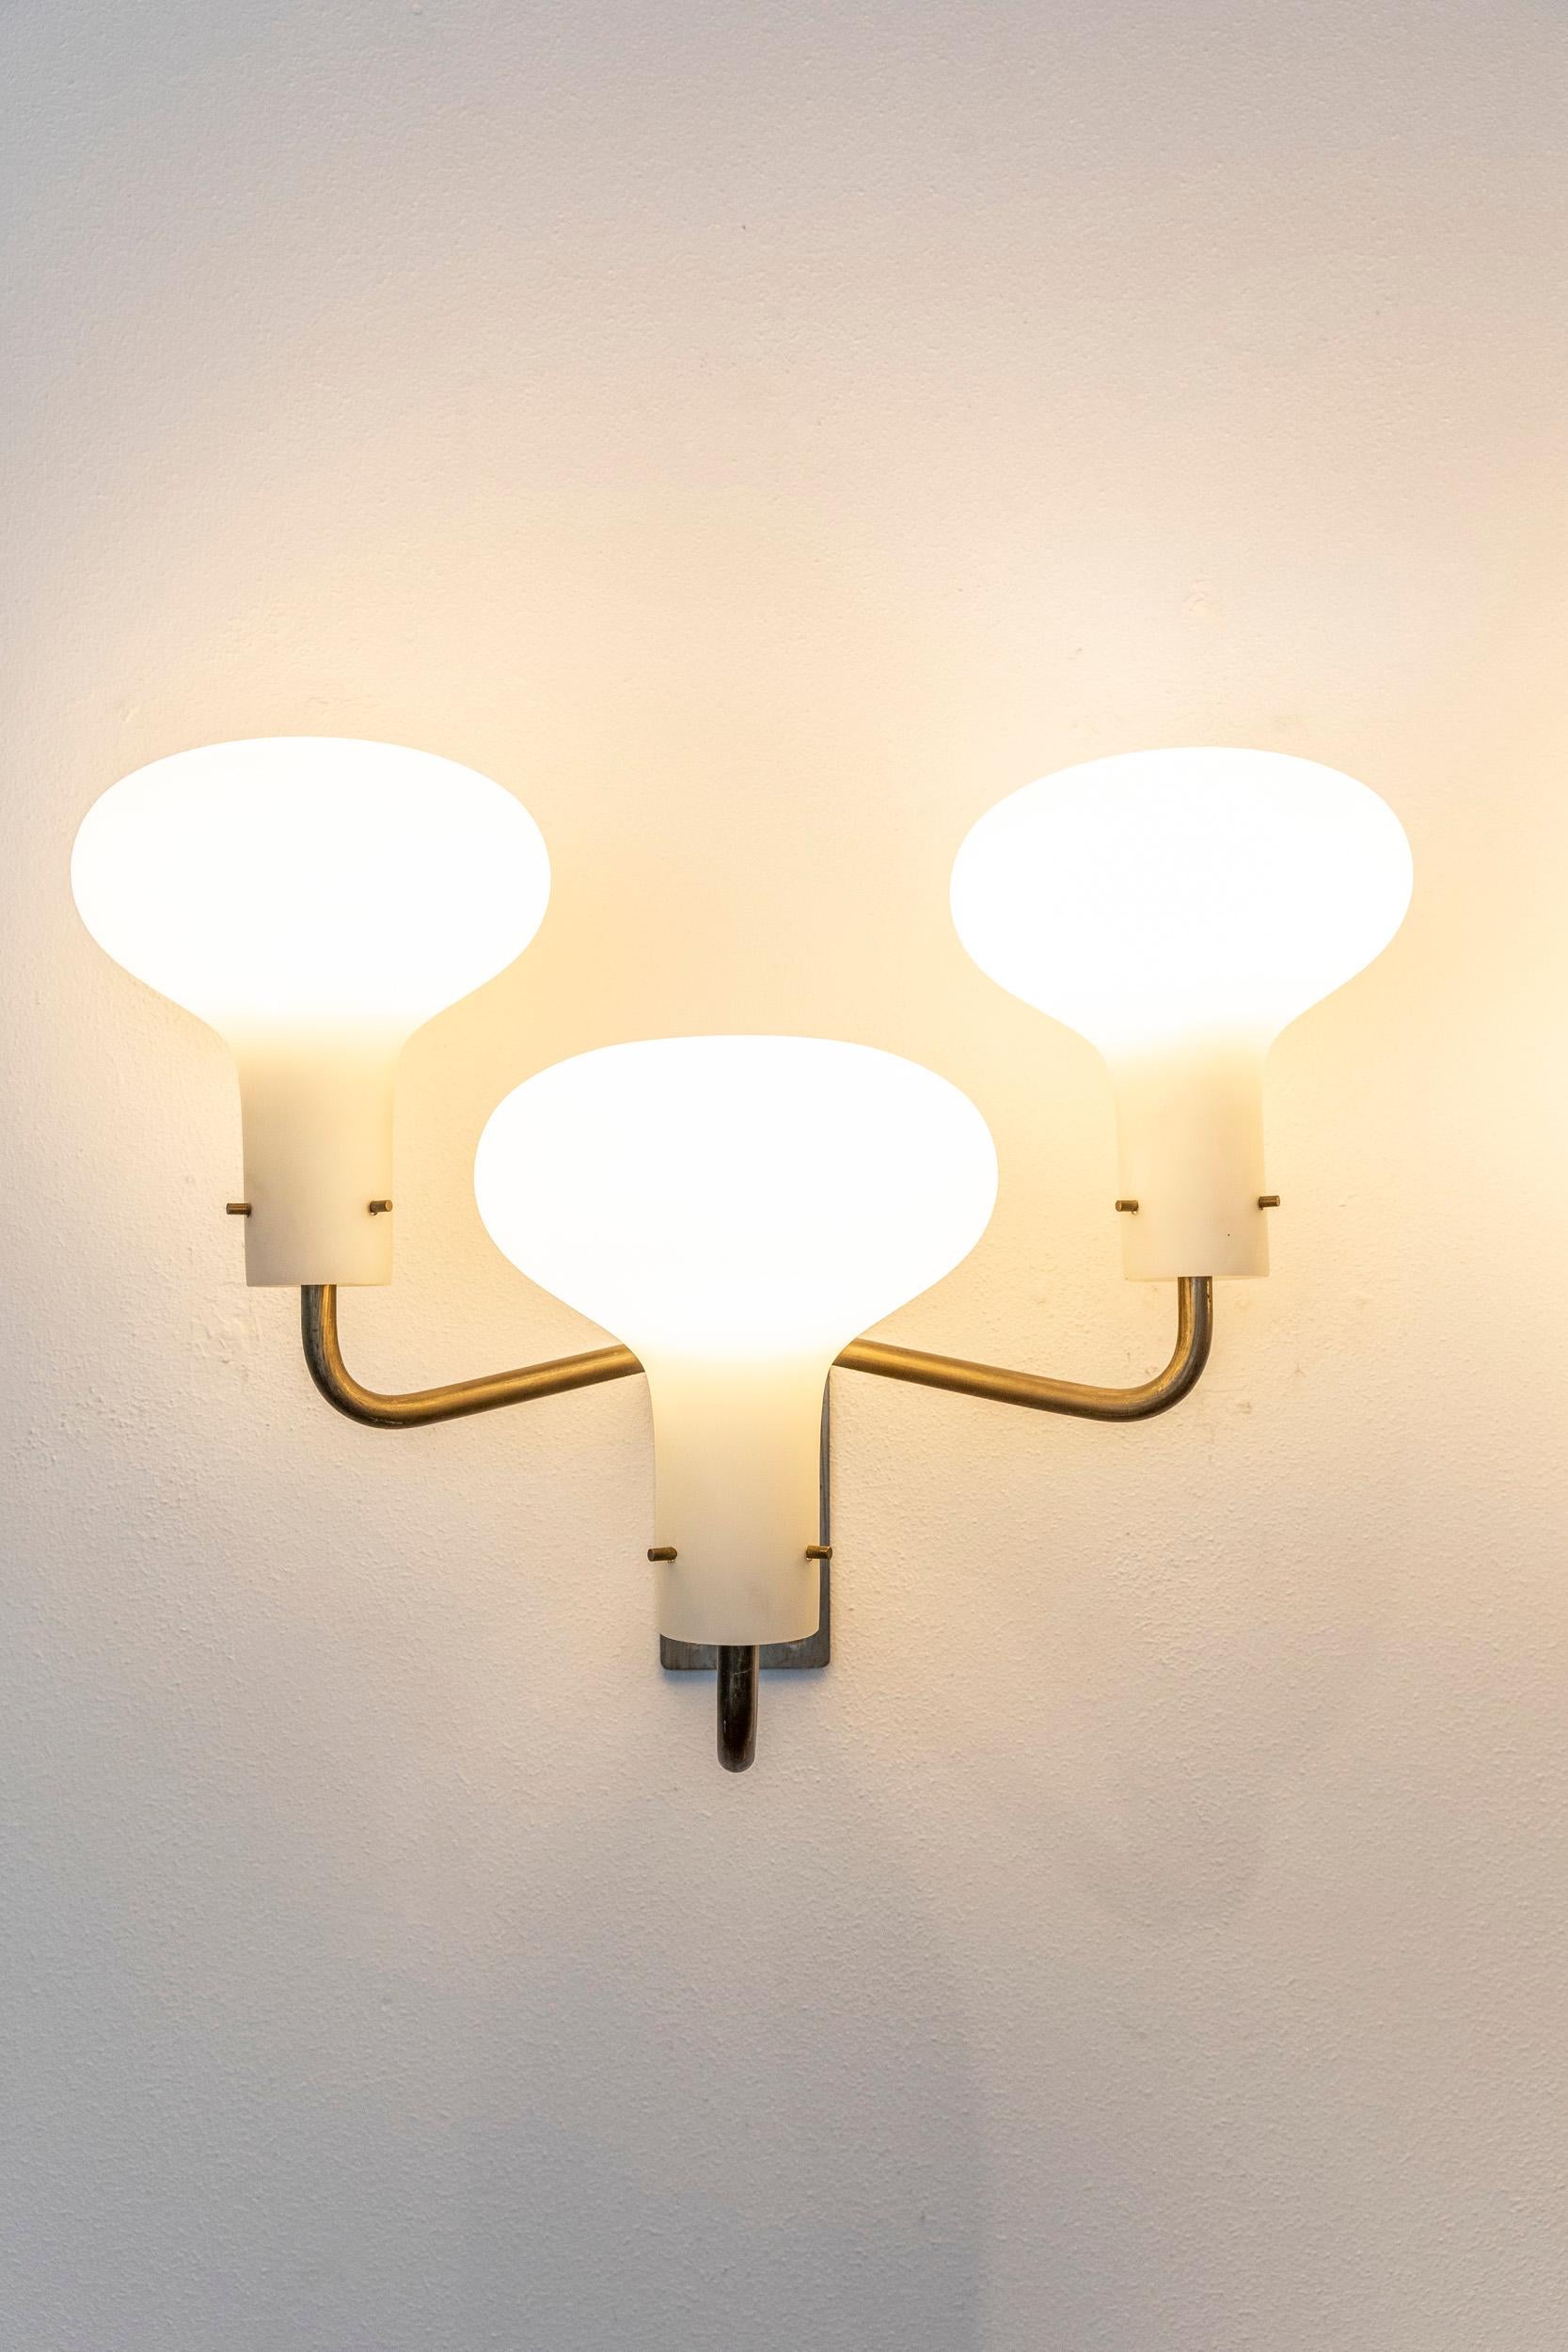 Mid-20th Century Midcentury wall lights model LP 12 by Ignazio Gardella for Azucena, signed